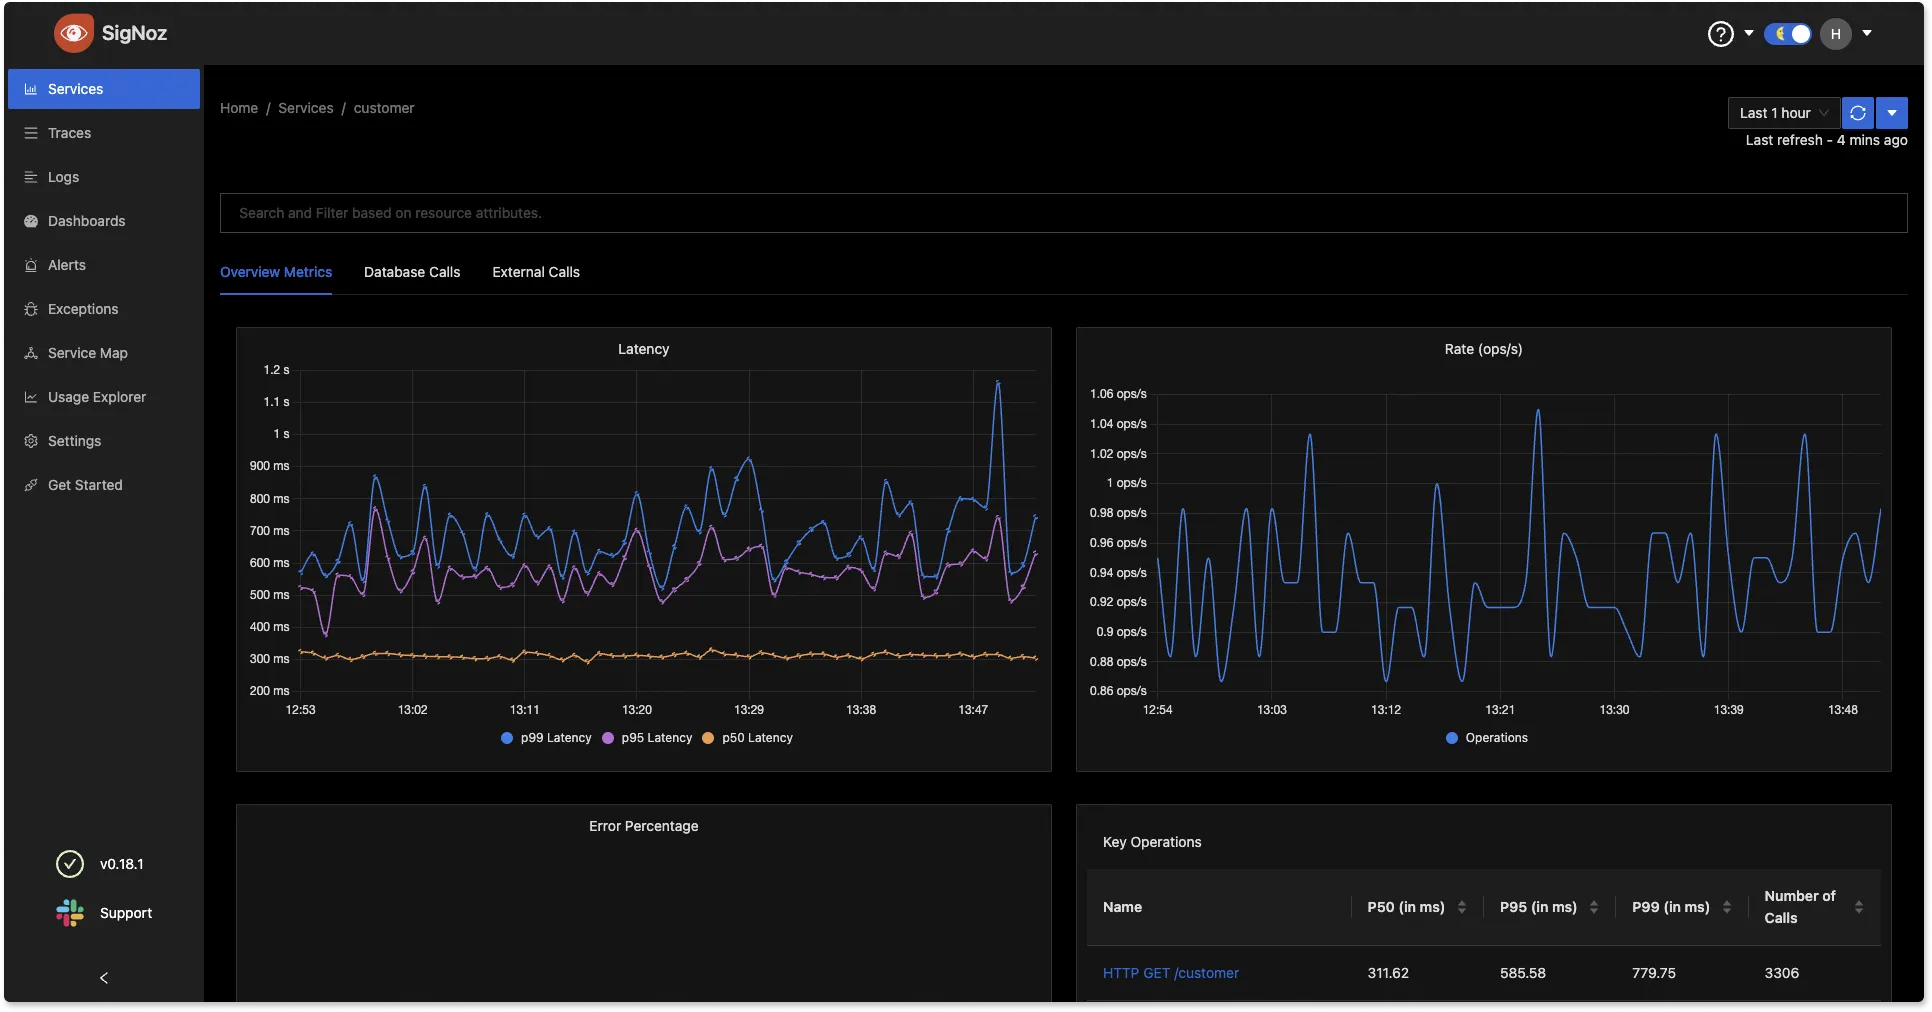 Charts showing important application metrics like latency, error rates, and requests per sec